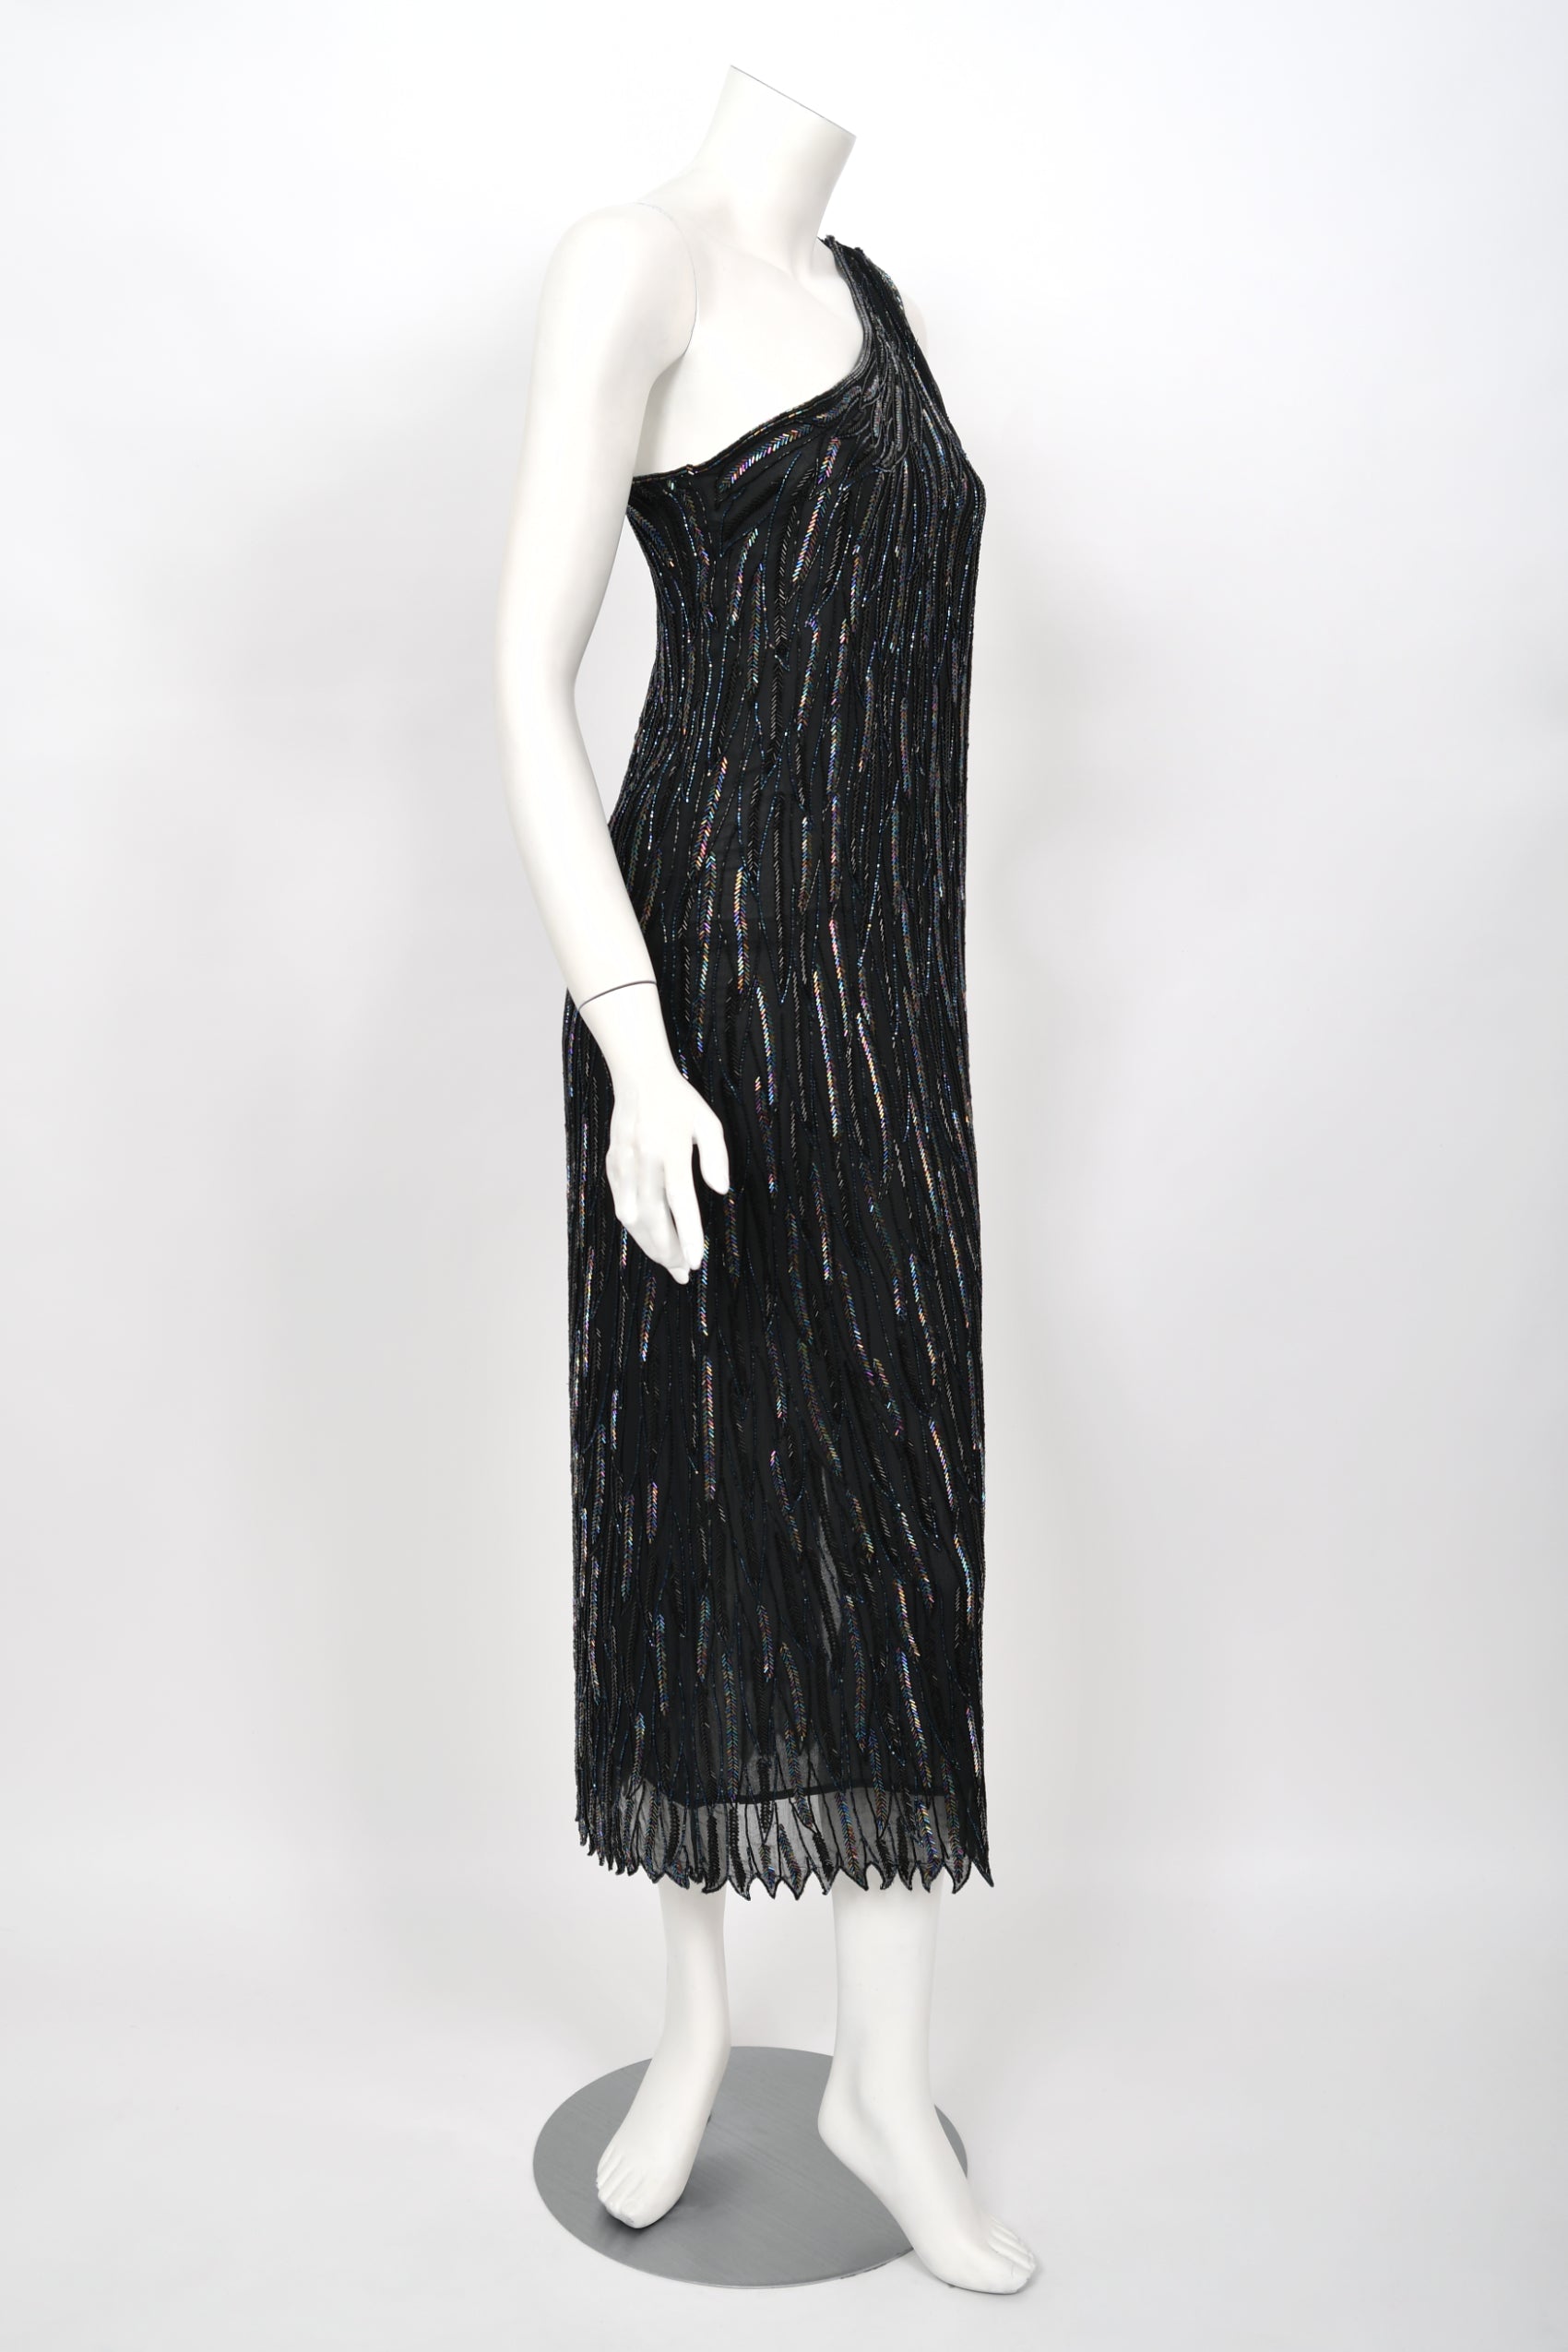 High Fashion Couture Black Iridescent Feather Dress -  Canada